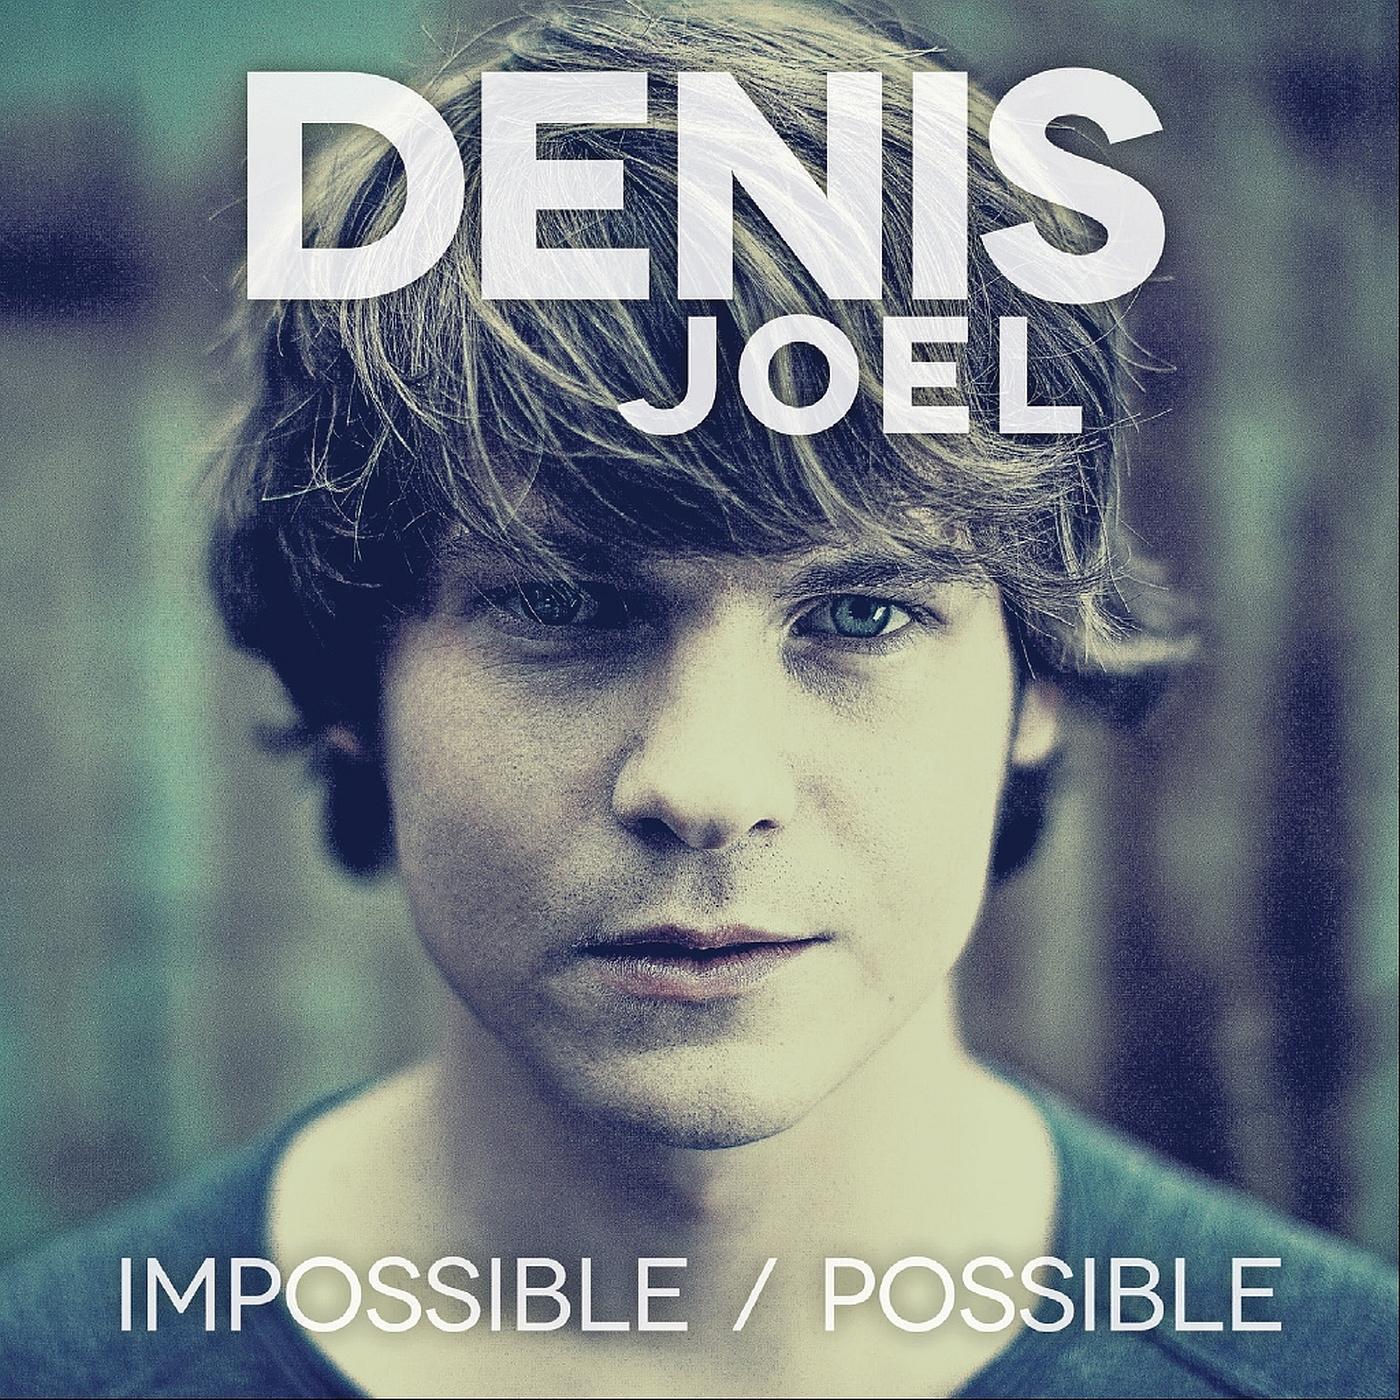 Impossible / Possible